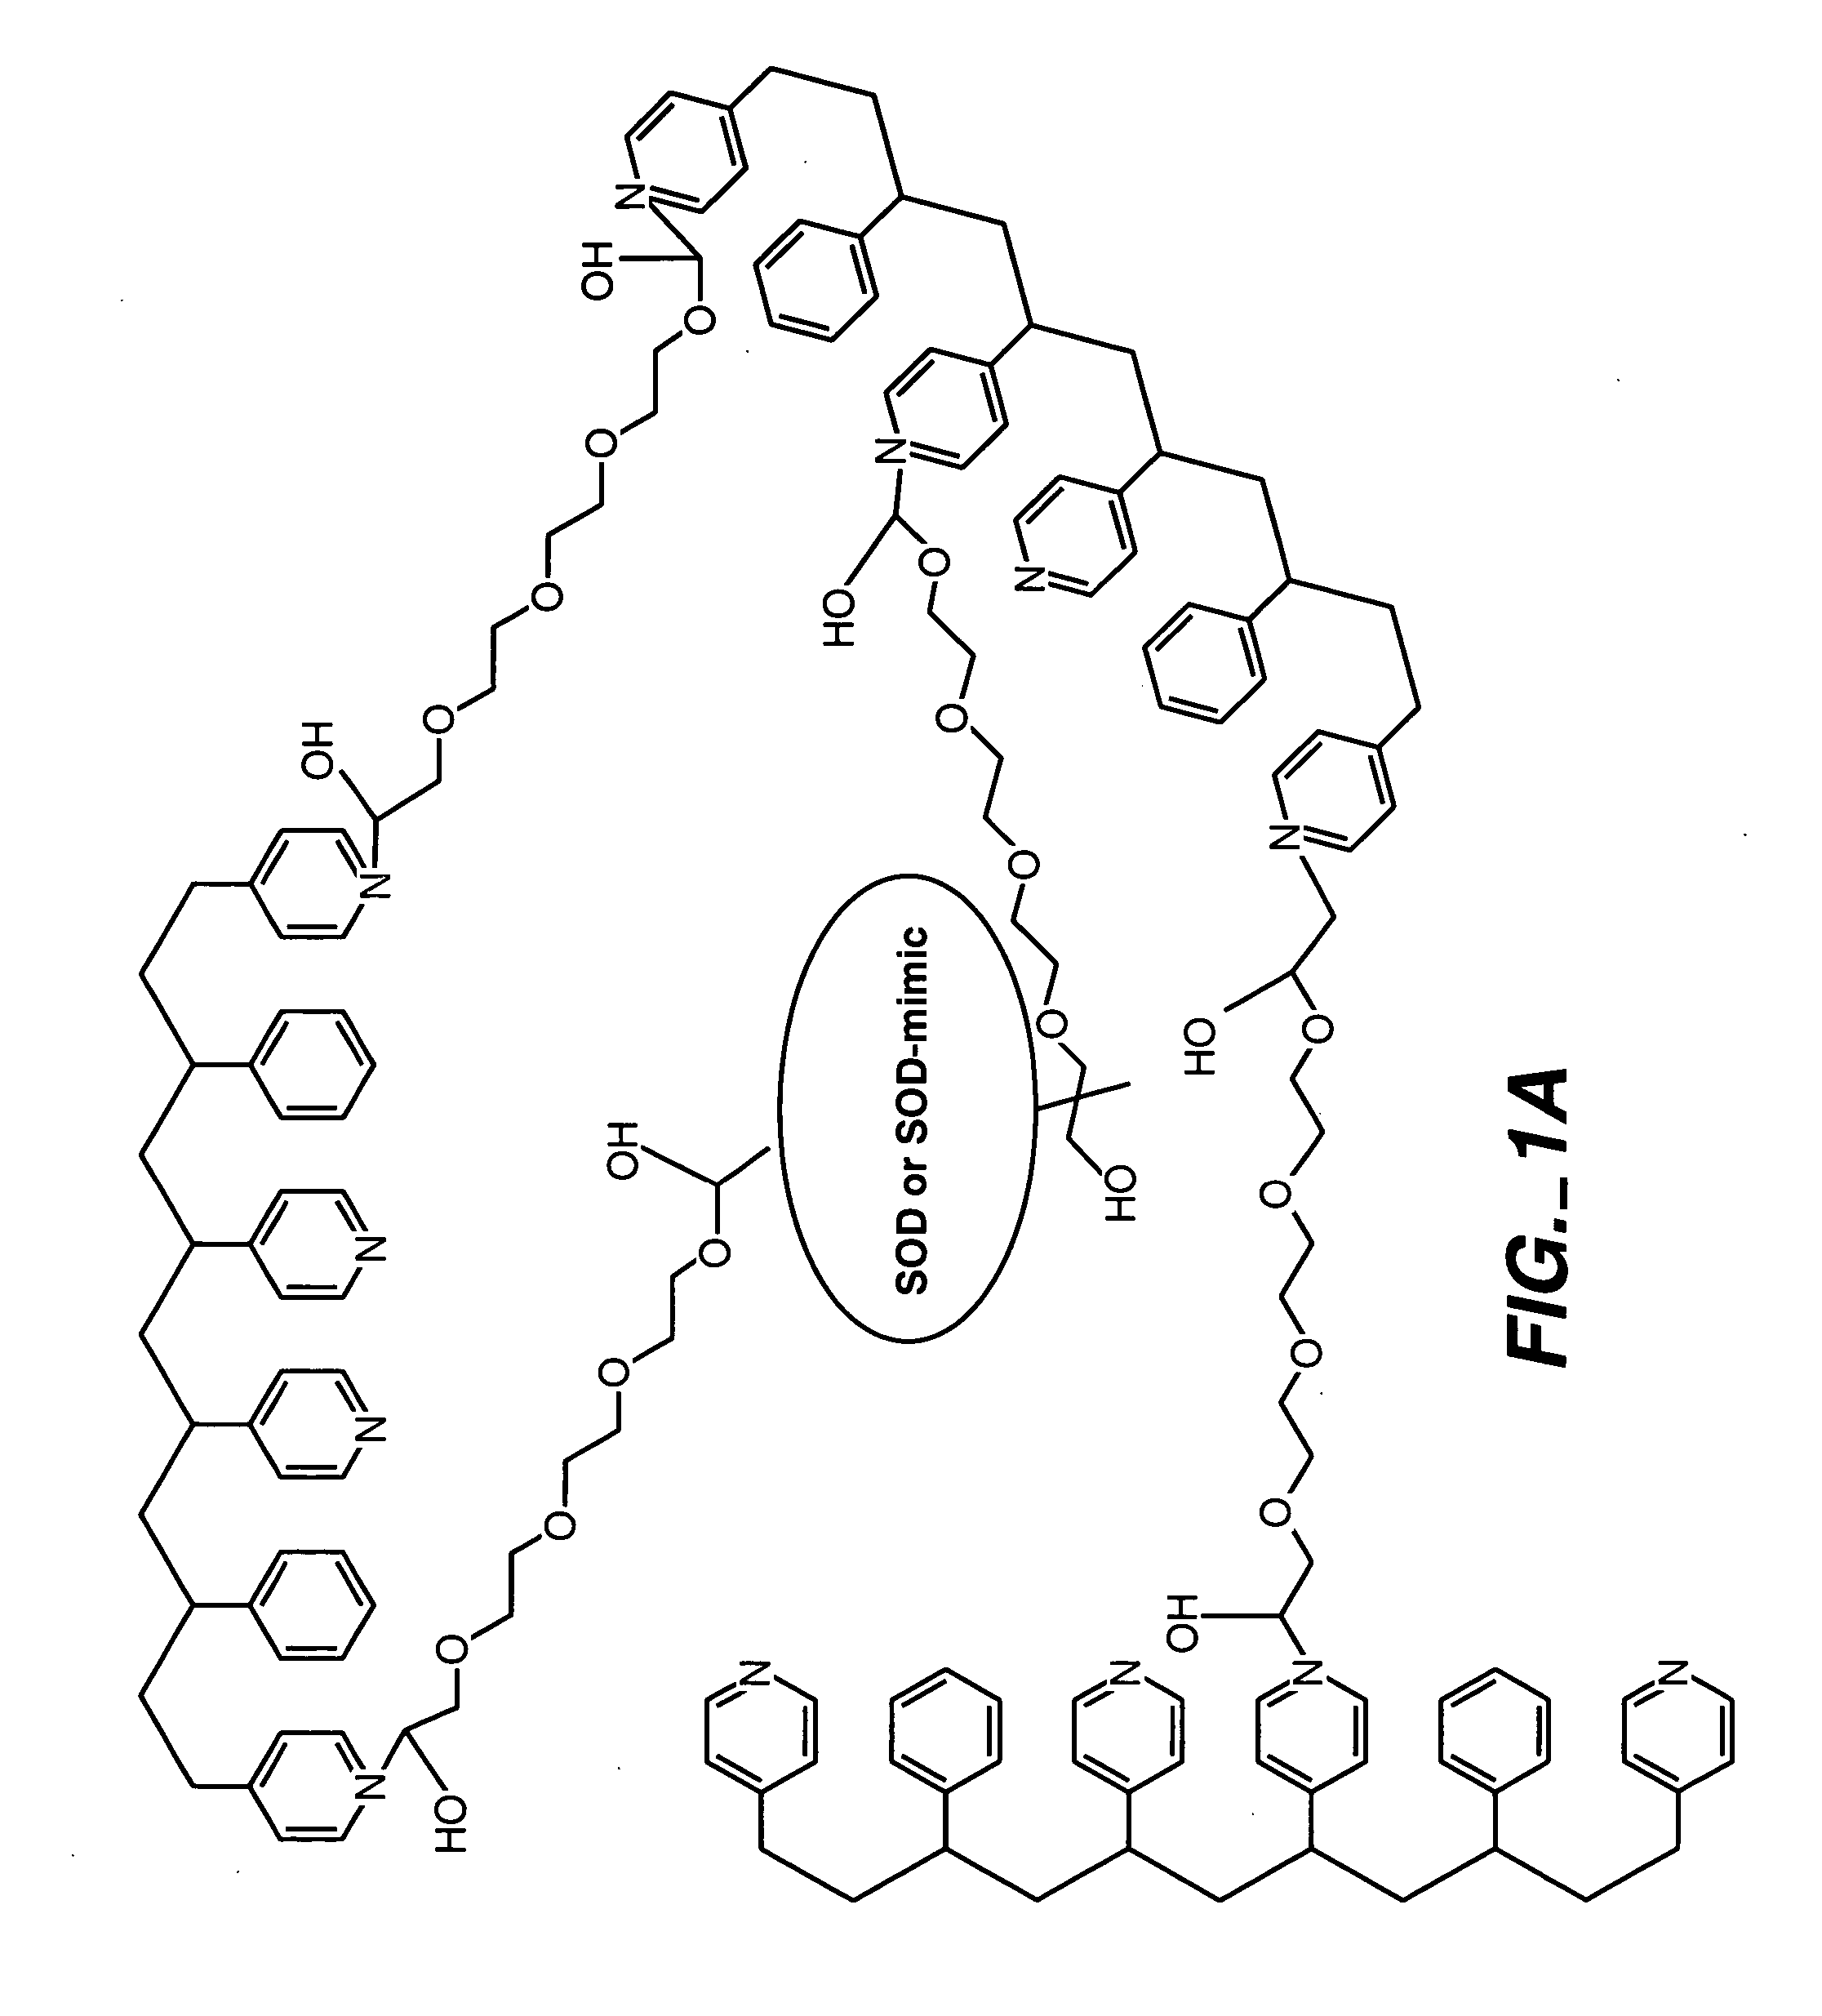 Membrane suitable for use in an analyte sensor, analyte sensor, and associated method